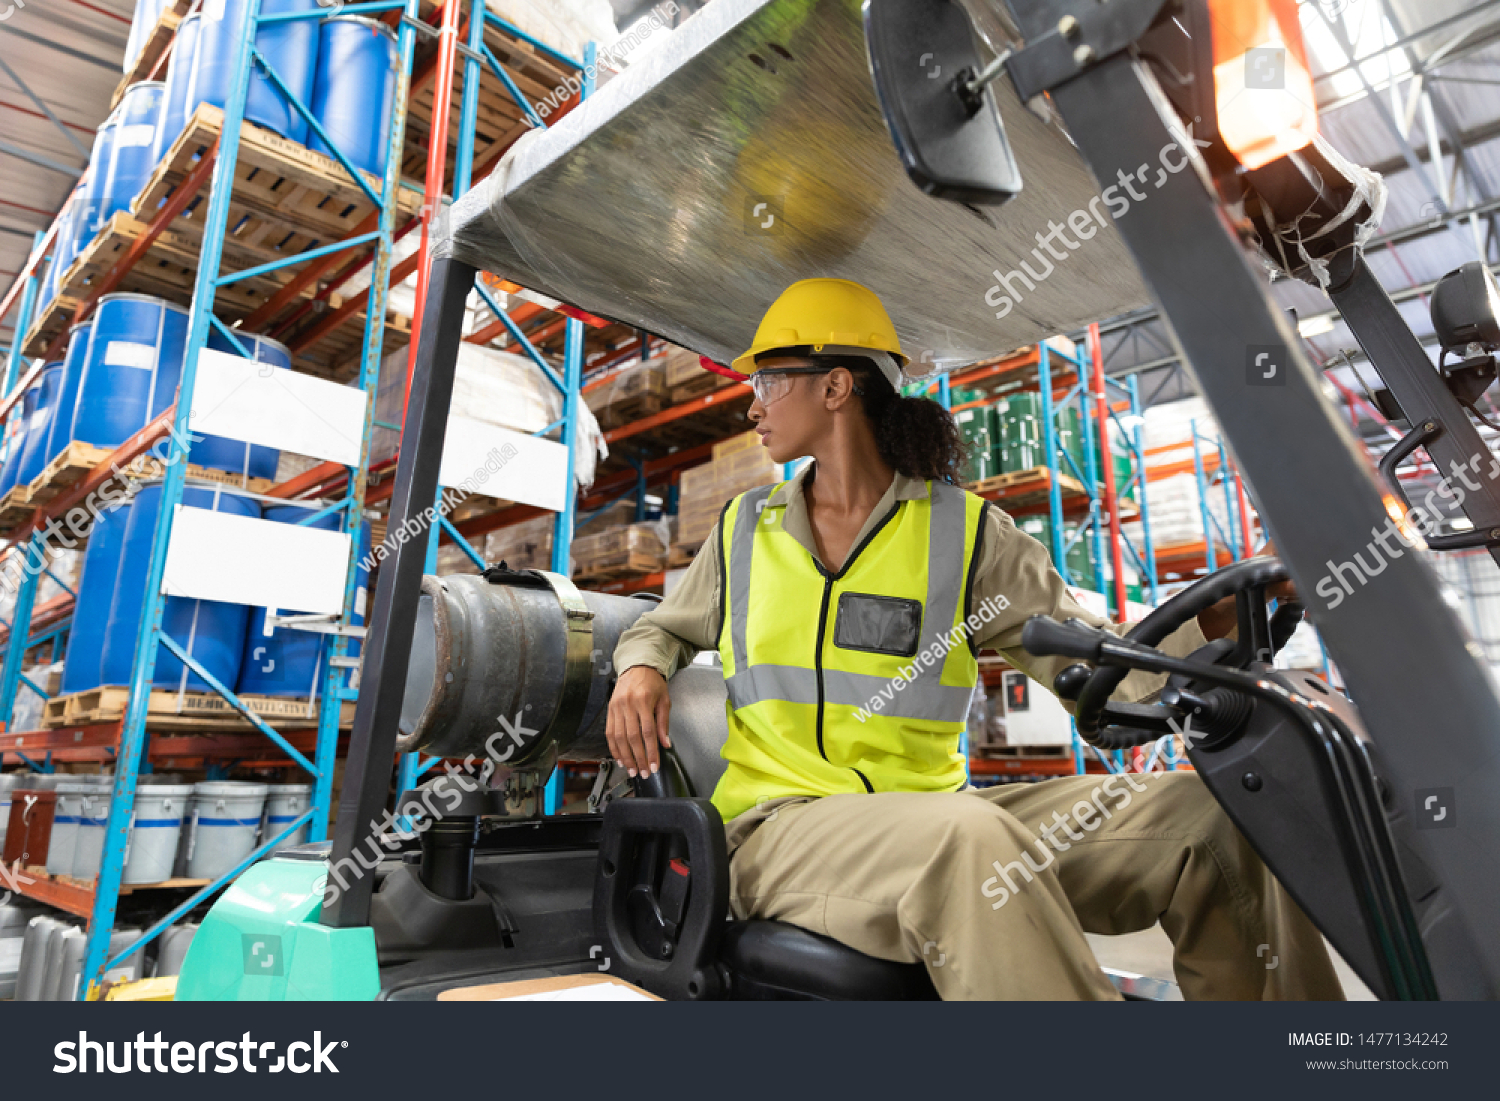 Low angle view of female staff driving forklift in warehouse. This is a freight transportation and distribution warehouse. Industrial and industrial workers concept #1477134242